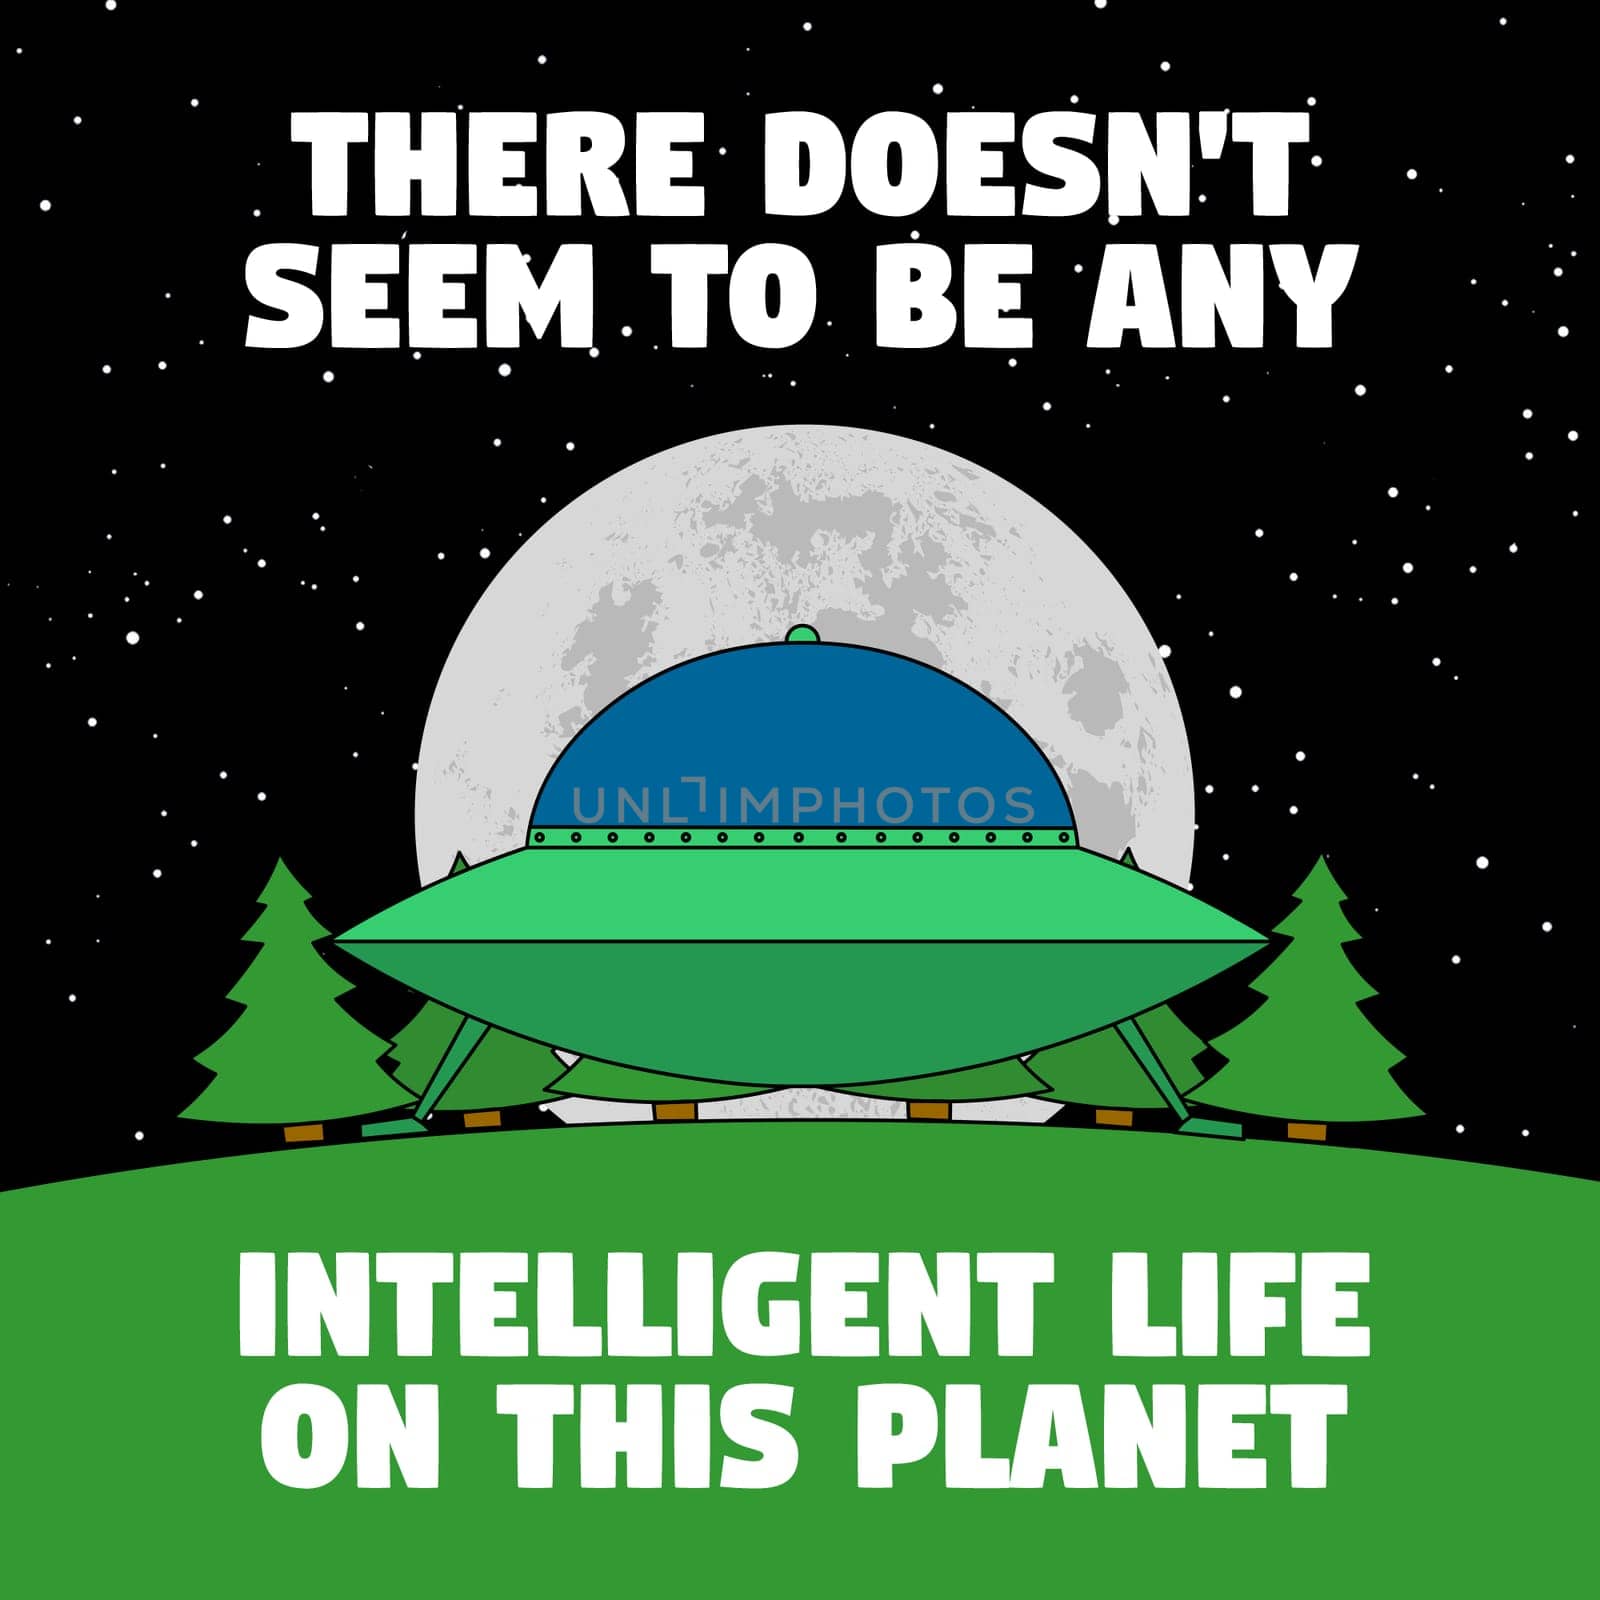 A spaceship landed with the moon and trees behind it with the text "There doesn't seem to be any intelligent life on this planet".